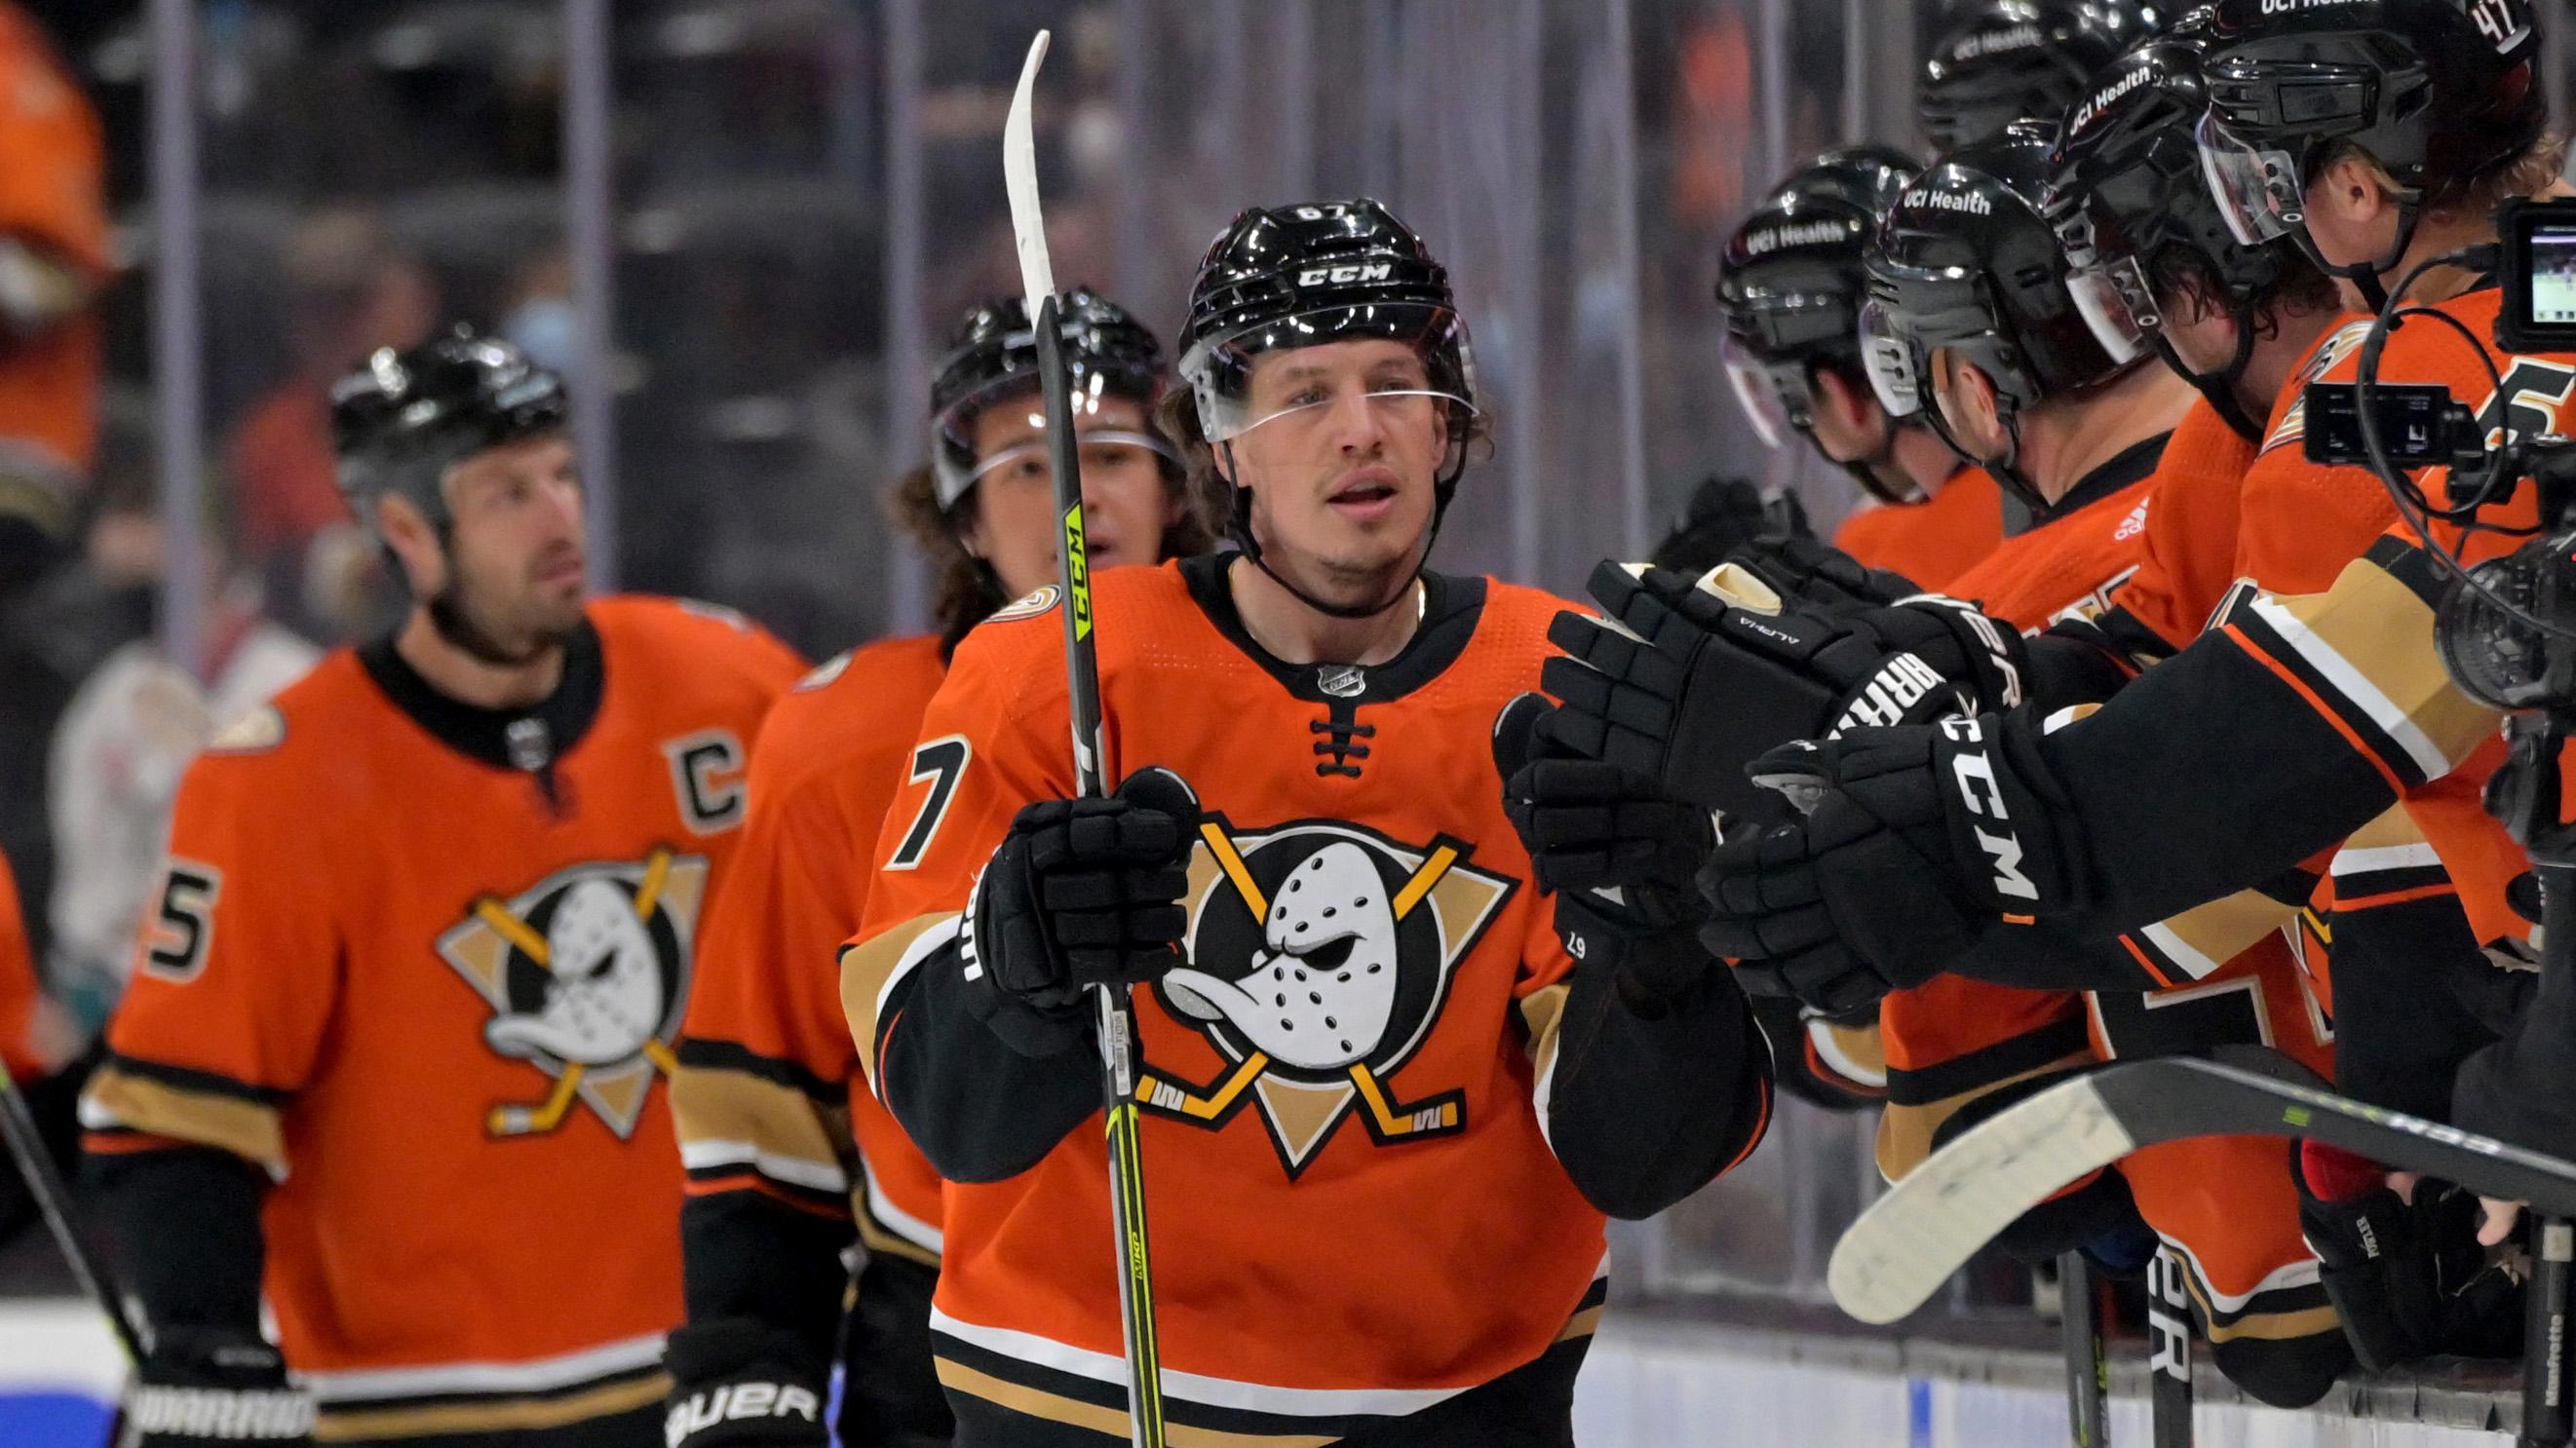 Anaheim Ducks left wing Rickard Rakell (67) is greeted at the bench after a goal in the second period against the Seattle Kraken at Honda Center. / Jayne Kamin-Oncea-USA TODAY Sports